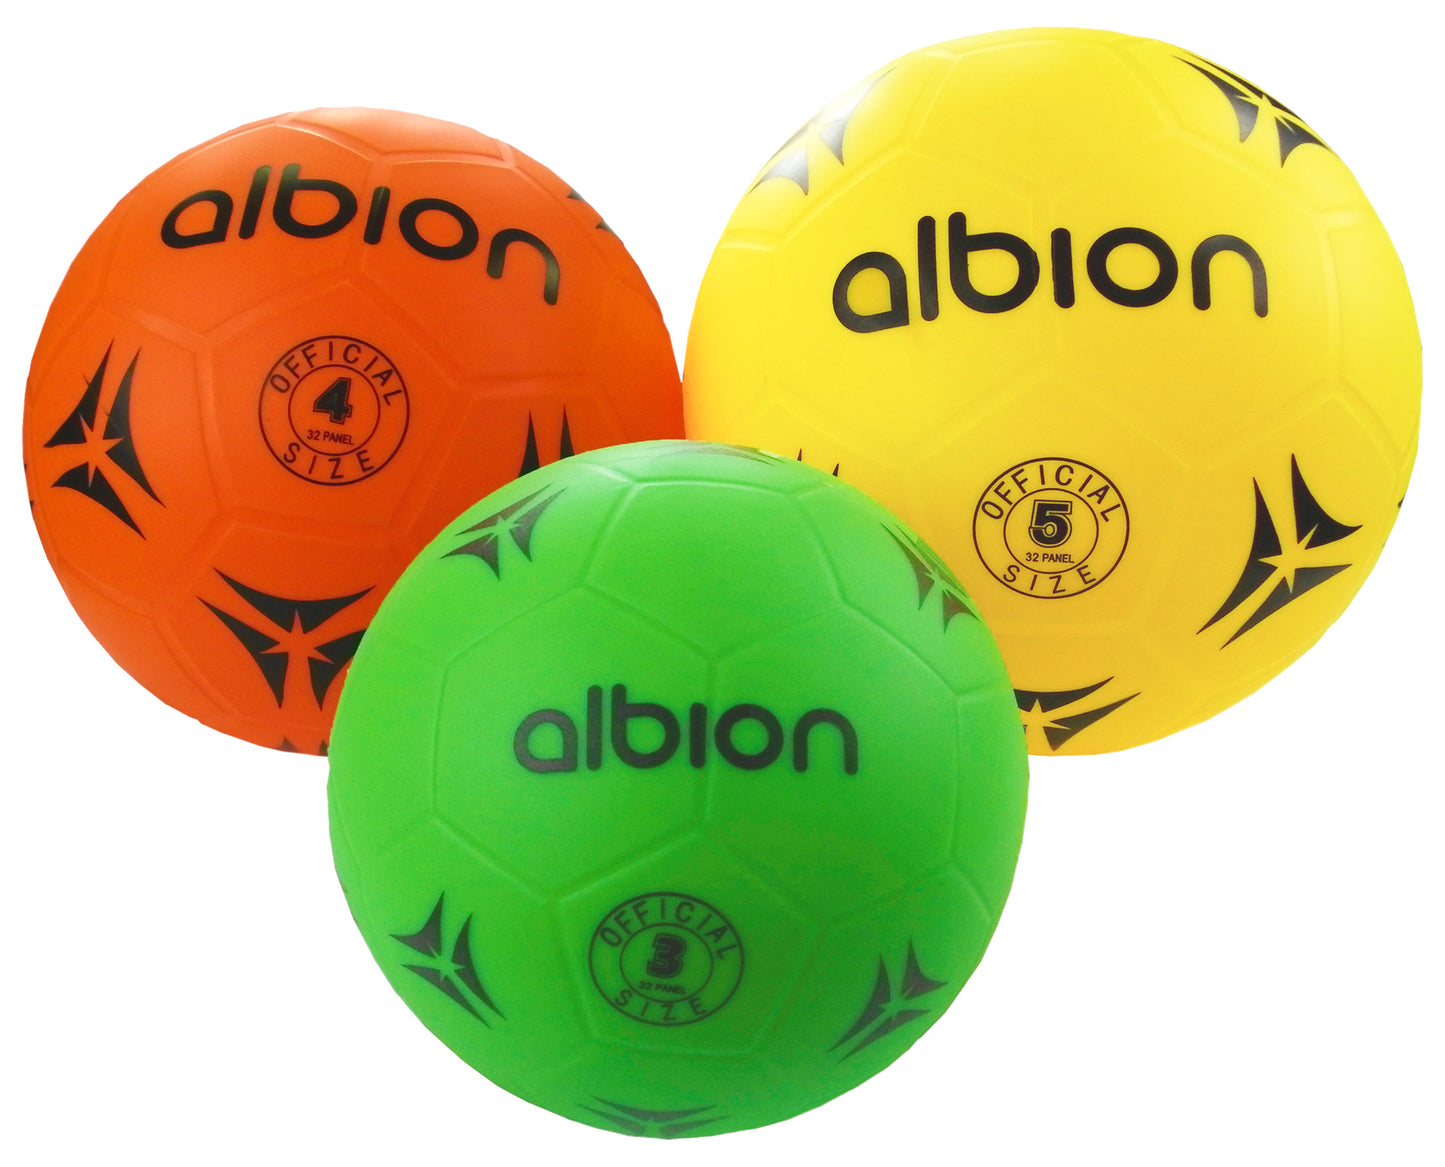 Albion Plastic Moulded Football